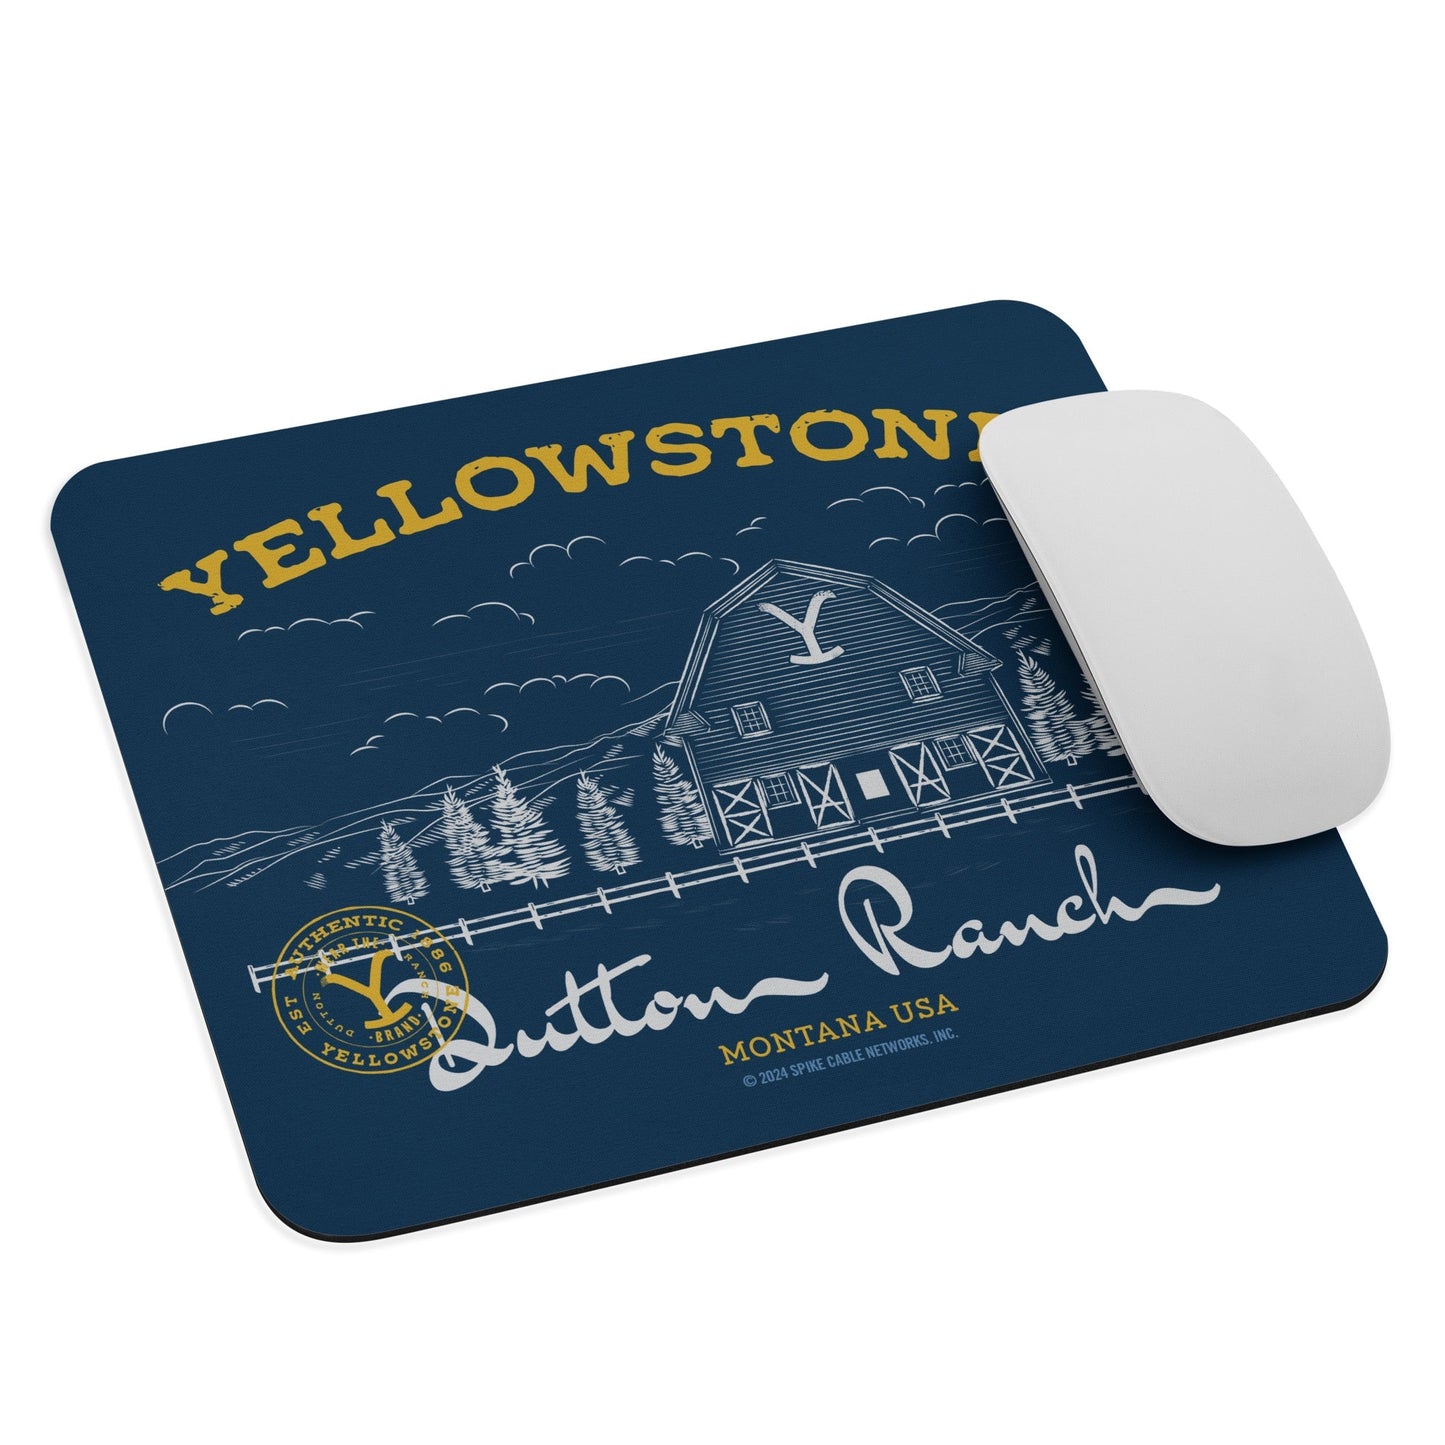 Yellowstone Dutton Ranch Barn Mouse Pad - Paramount Shop